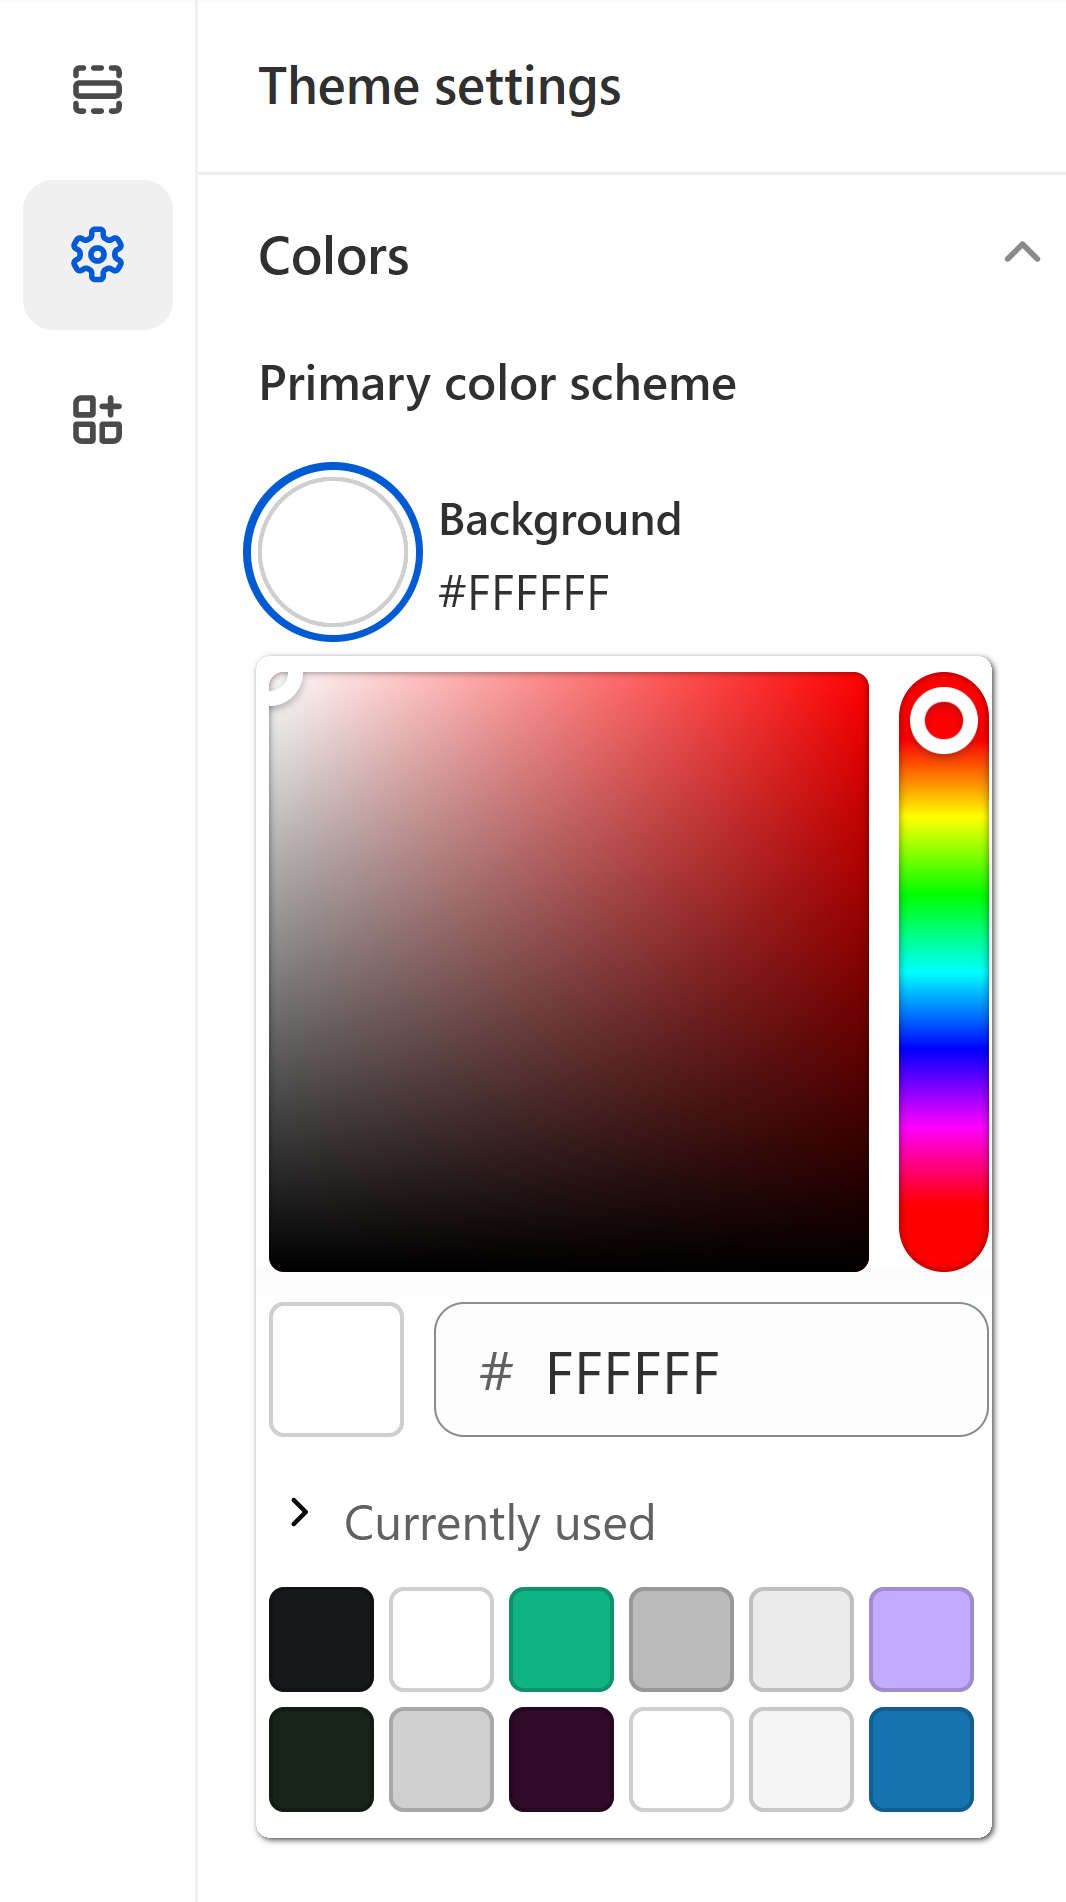 The Theme settings color picker for adjusting the Primary color scheme's background color setting in Theme editor.